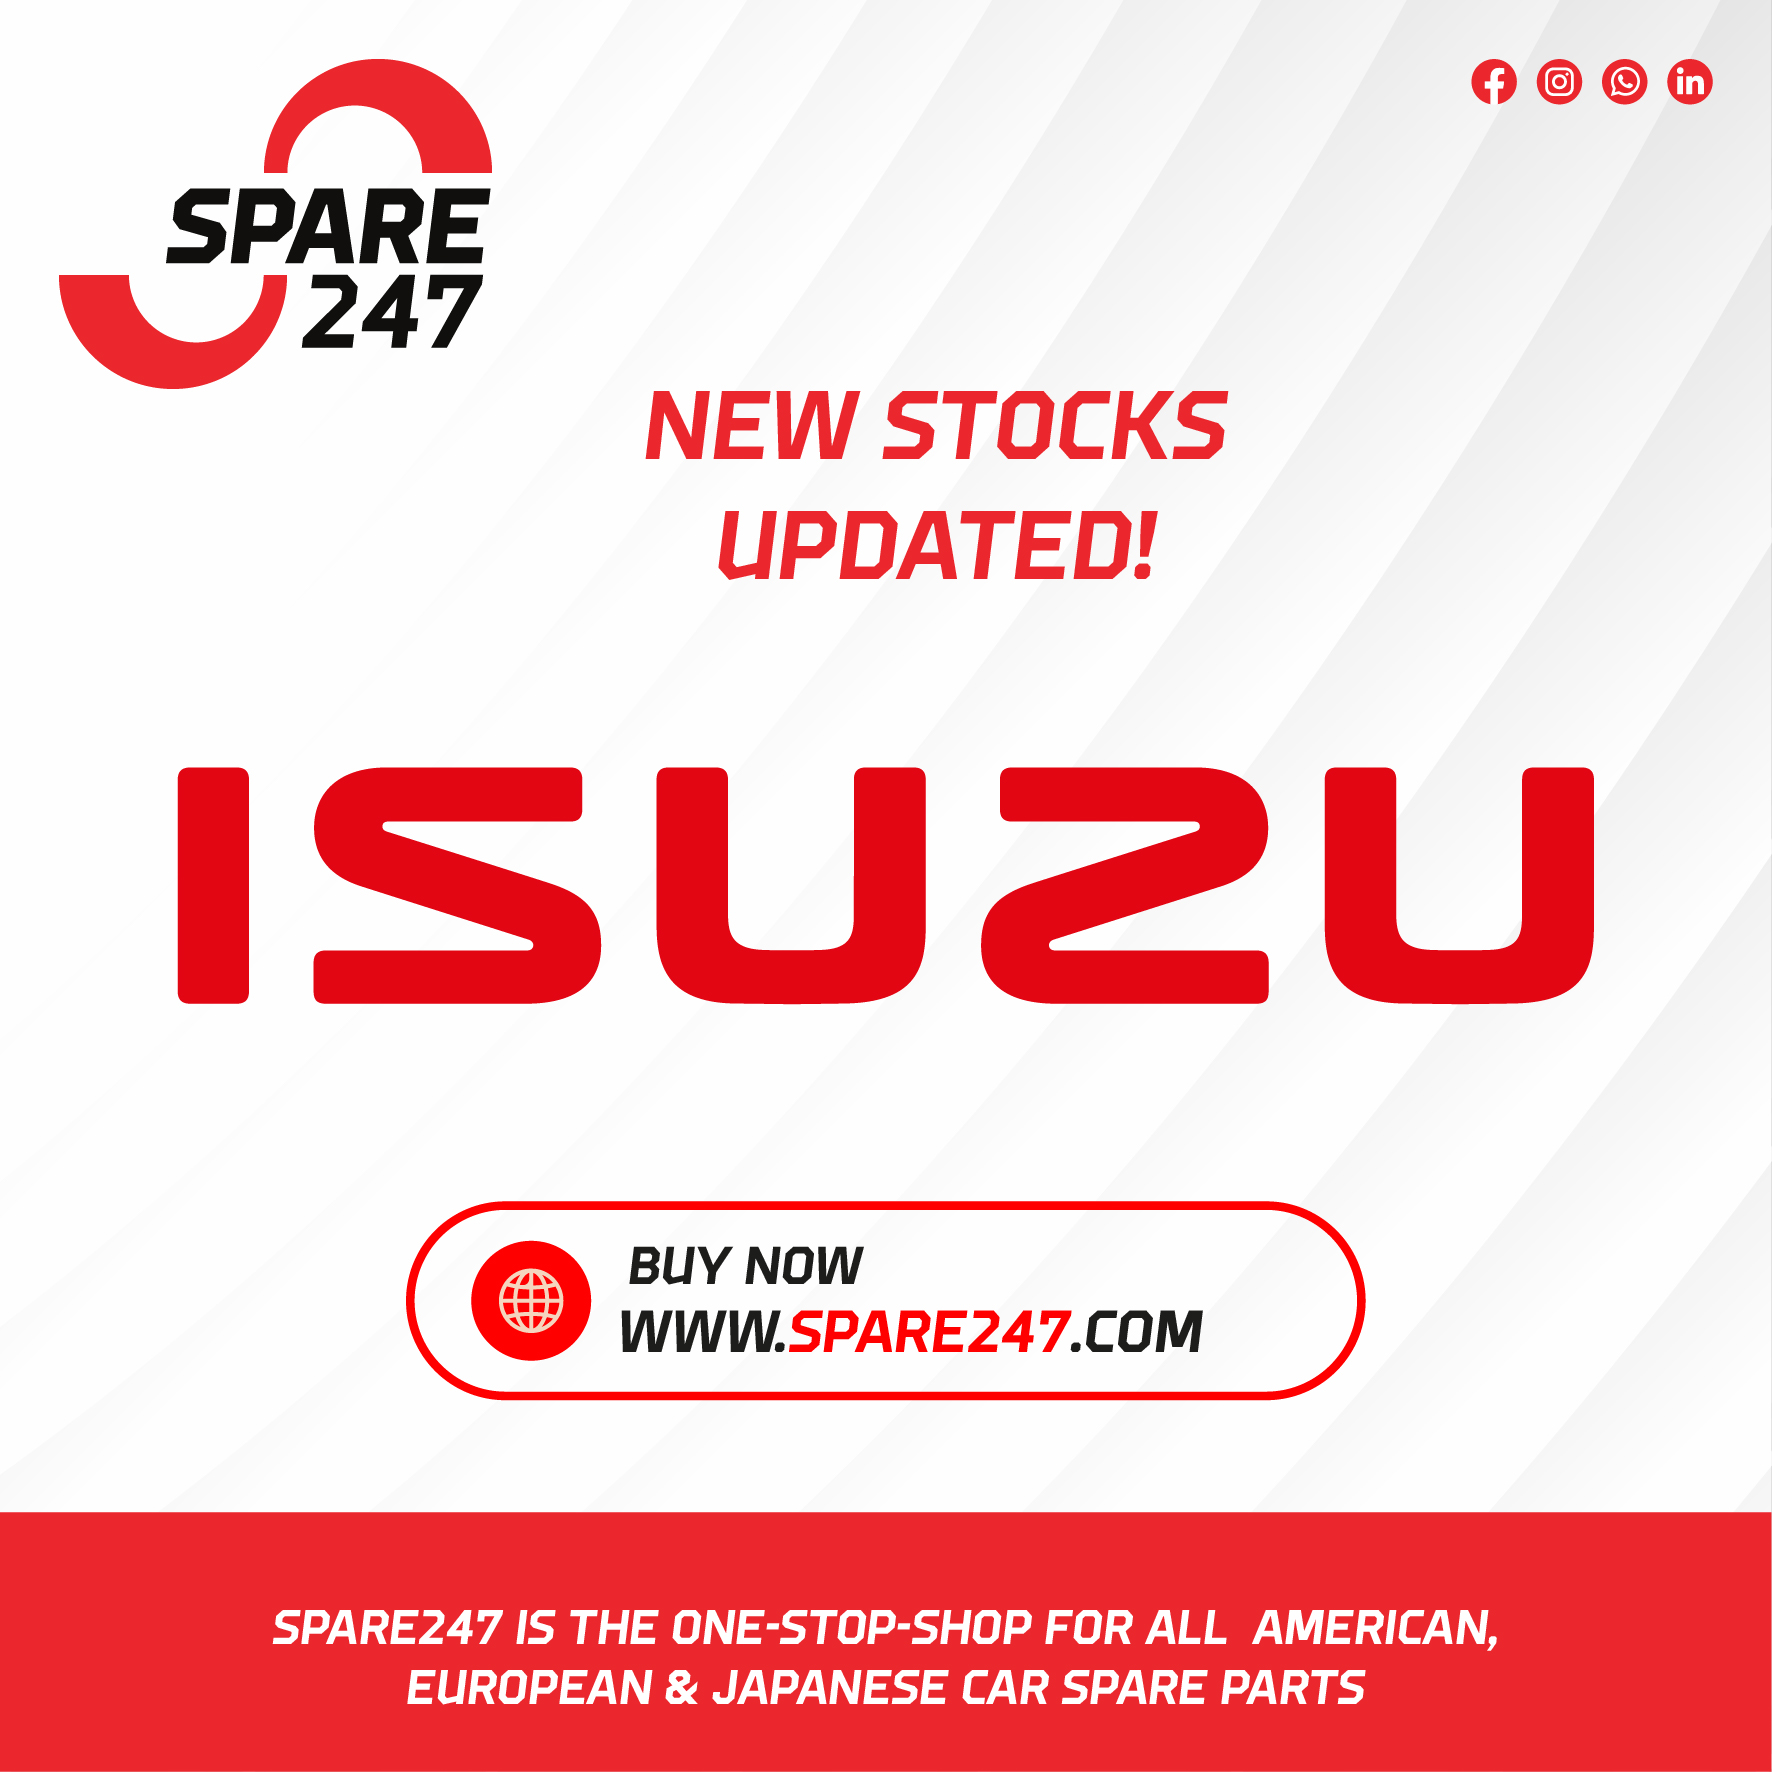 Now you can buy Genuine ISUZU parts on spare247.com